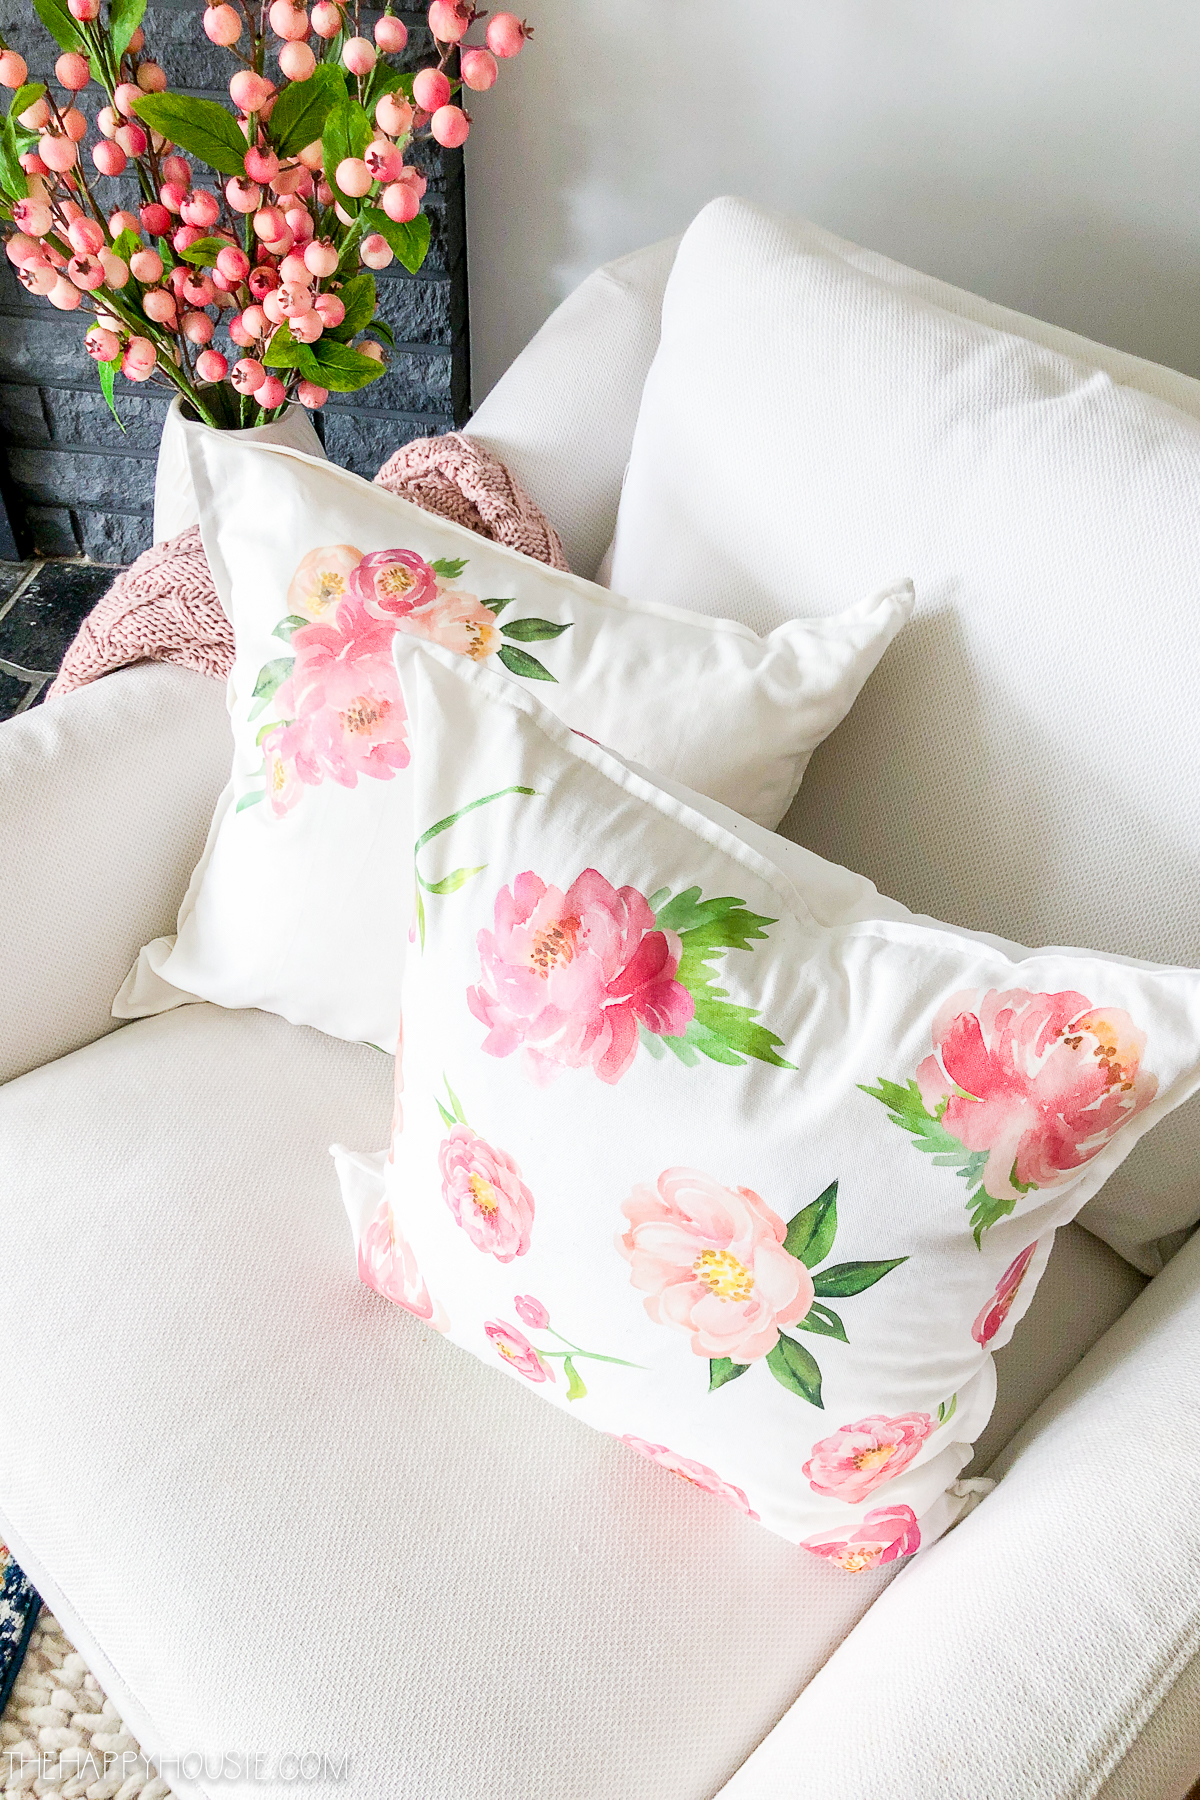 The pretty florals on the throw pillows on the armchair.